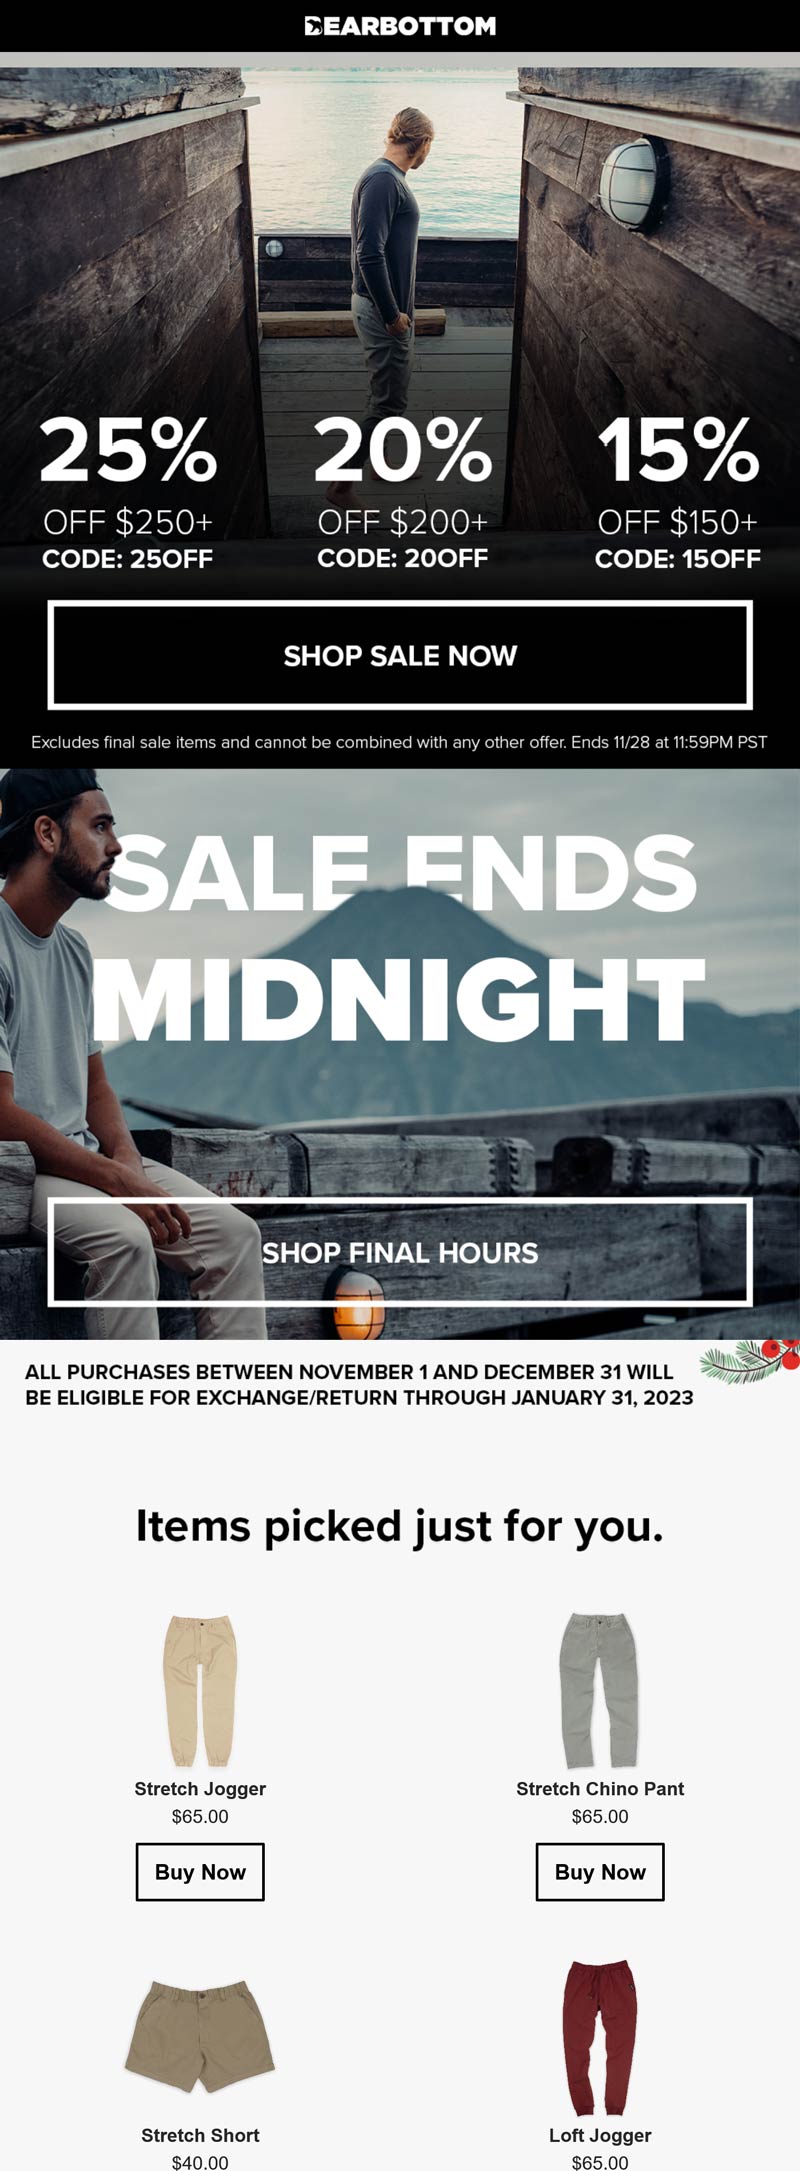 Bearbottom coupons & promo code for [January 2023]